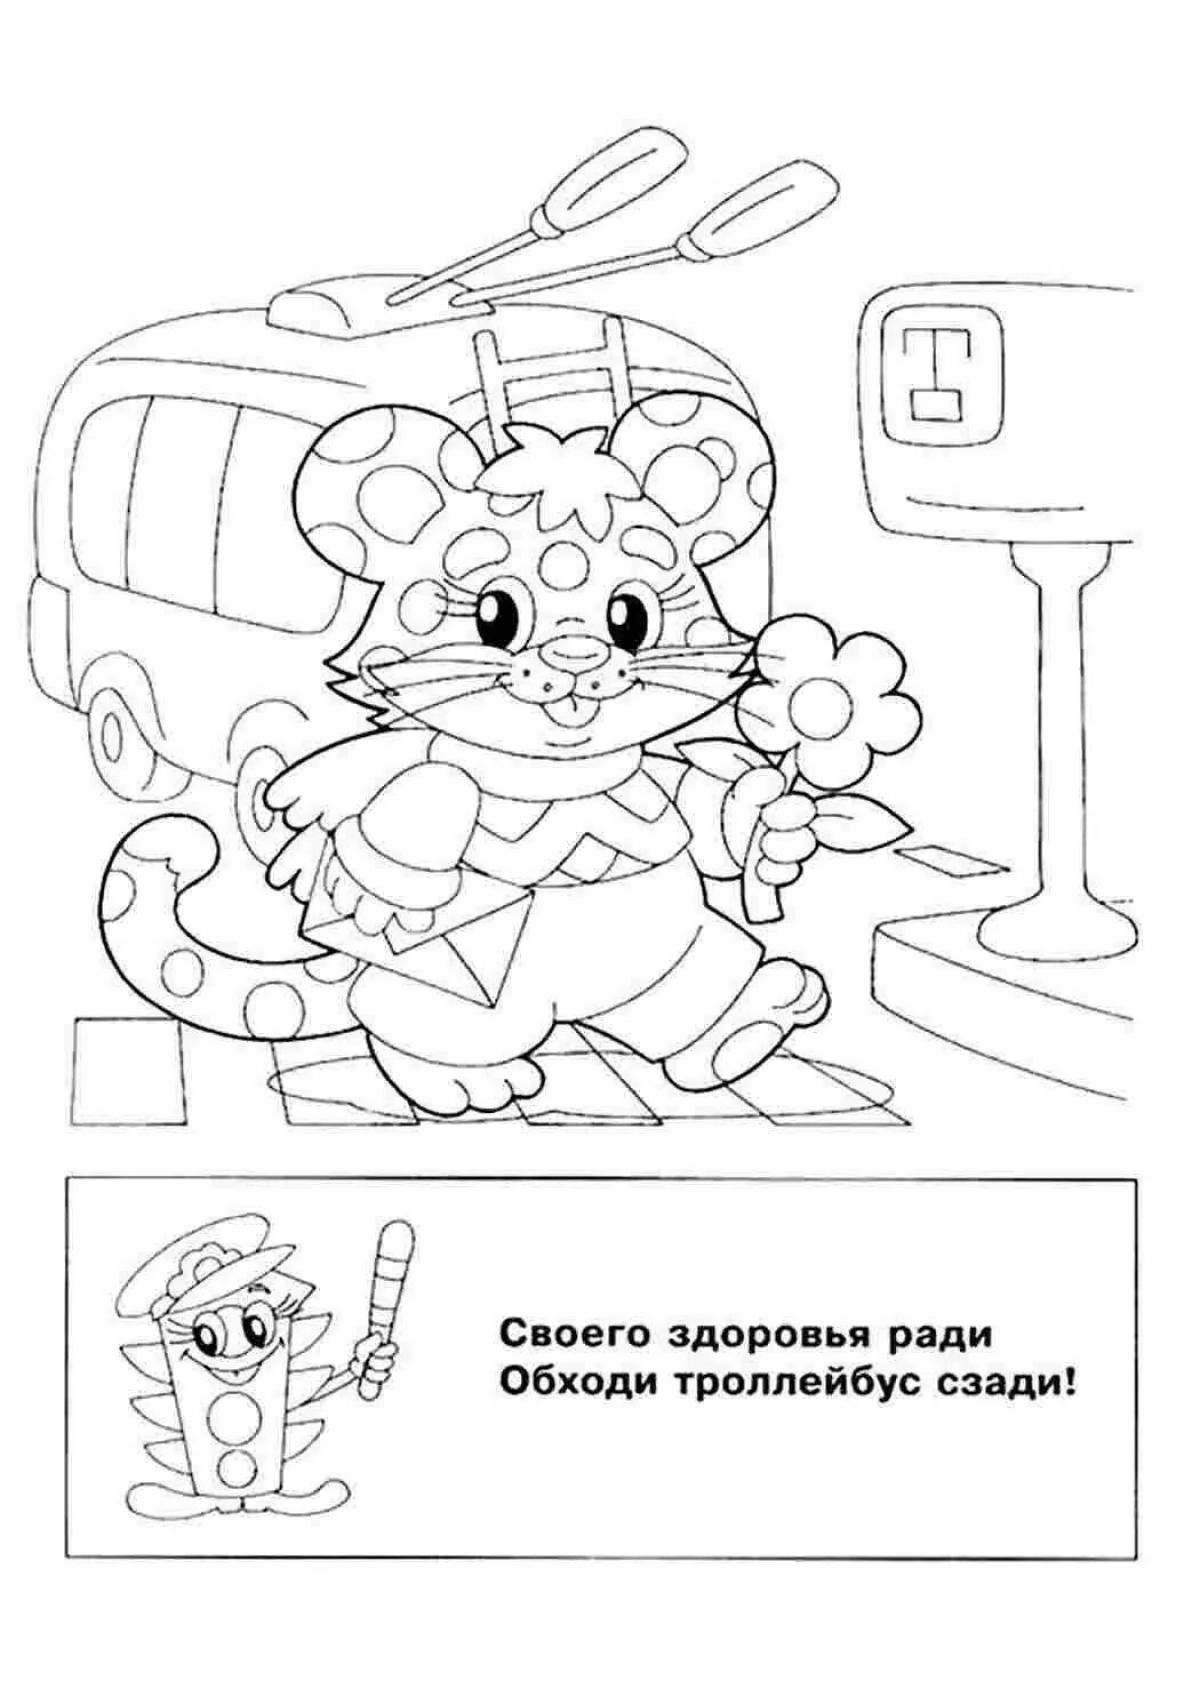 Creative coloring pages traffic rules for schoolchildren